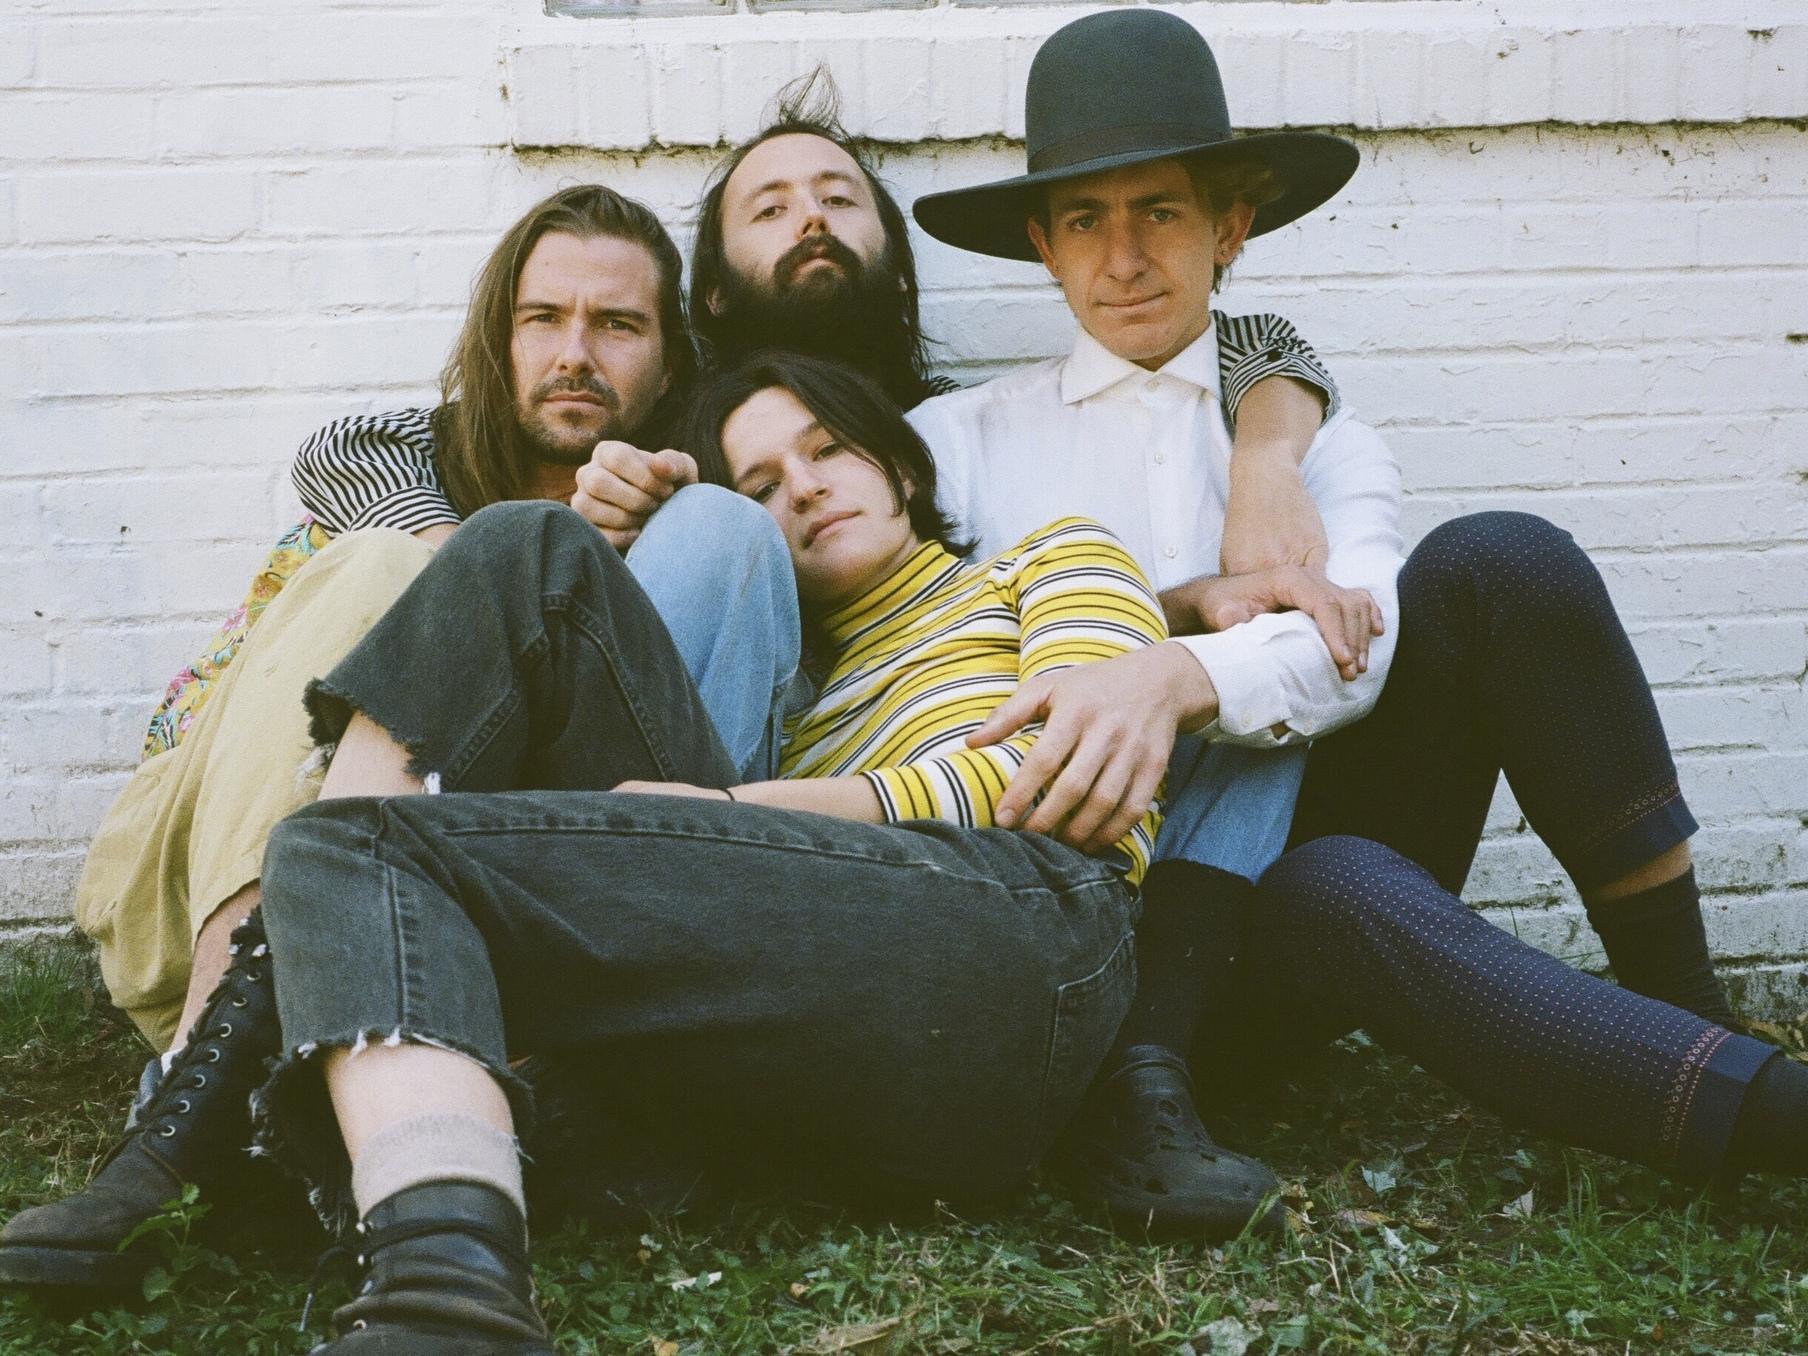 Big Thief's Adrianne Lenker: 'We're all brainwashed', The Independent